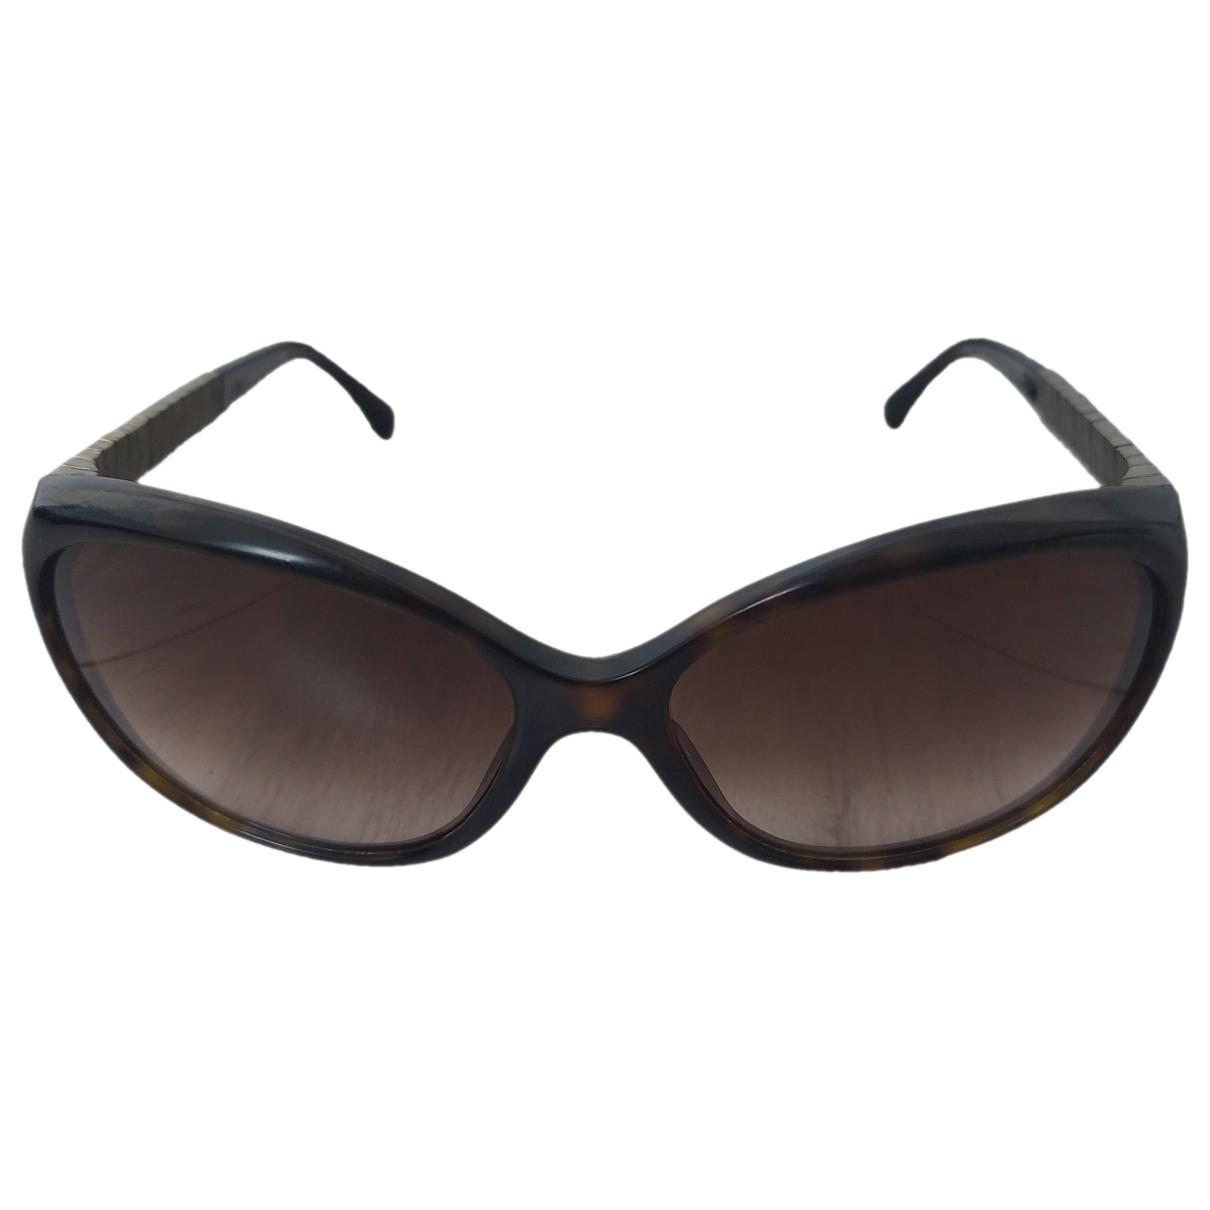 Chanel - Authenticated Sunglasses - Plastic Black for Women, Very Good Condition